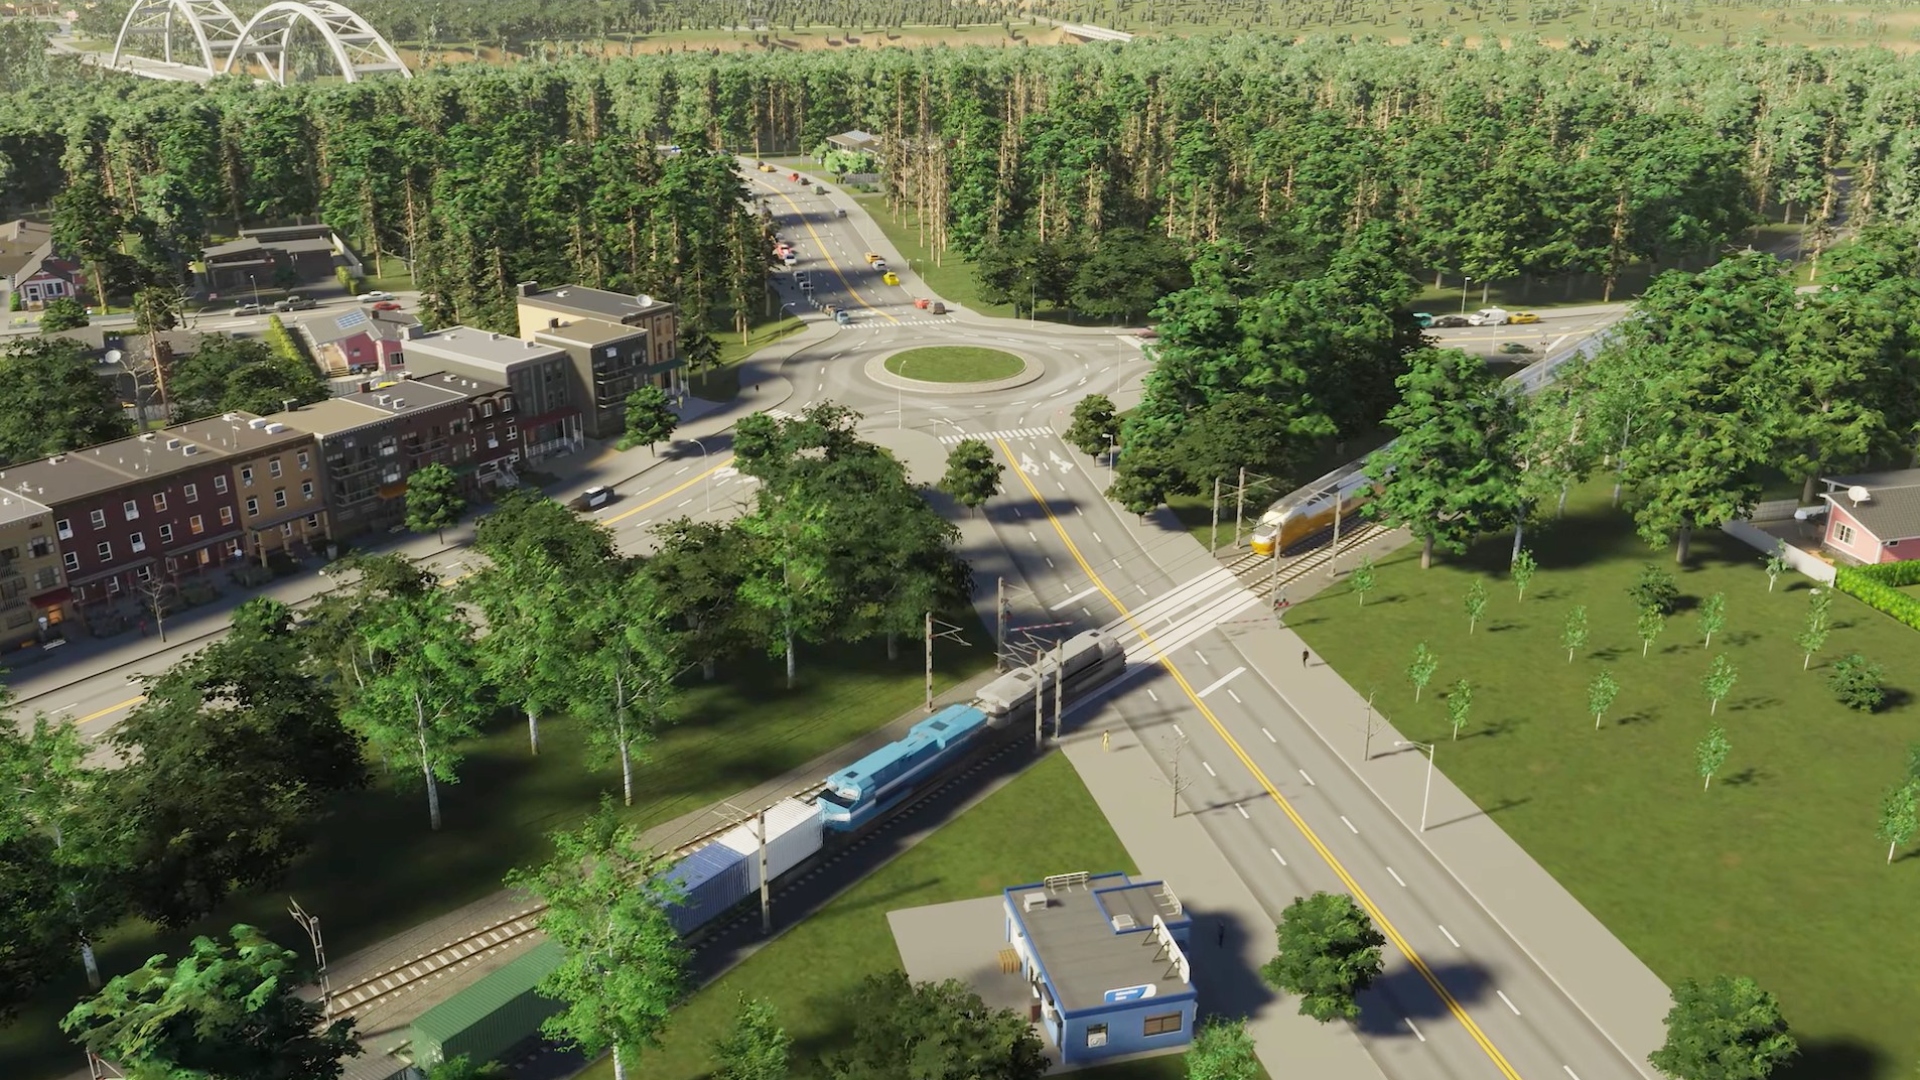 Cities: Skylines 2 maps are now bigger than some countries